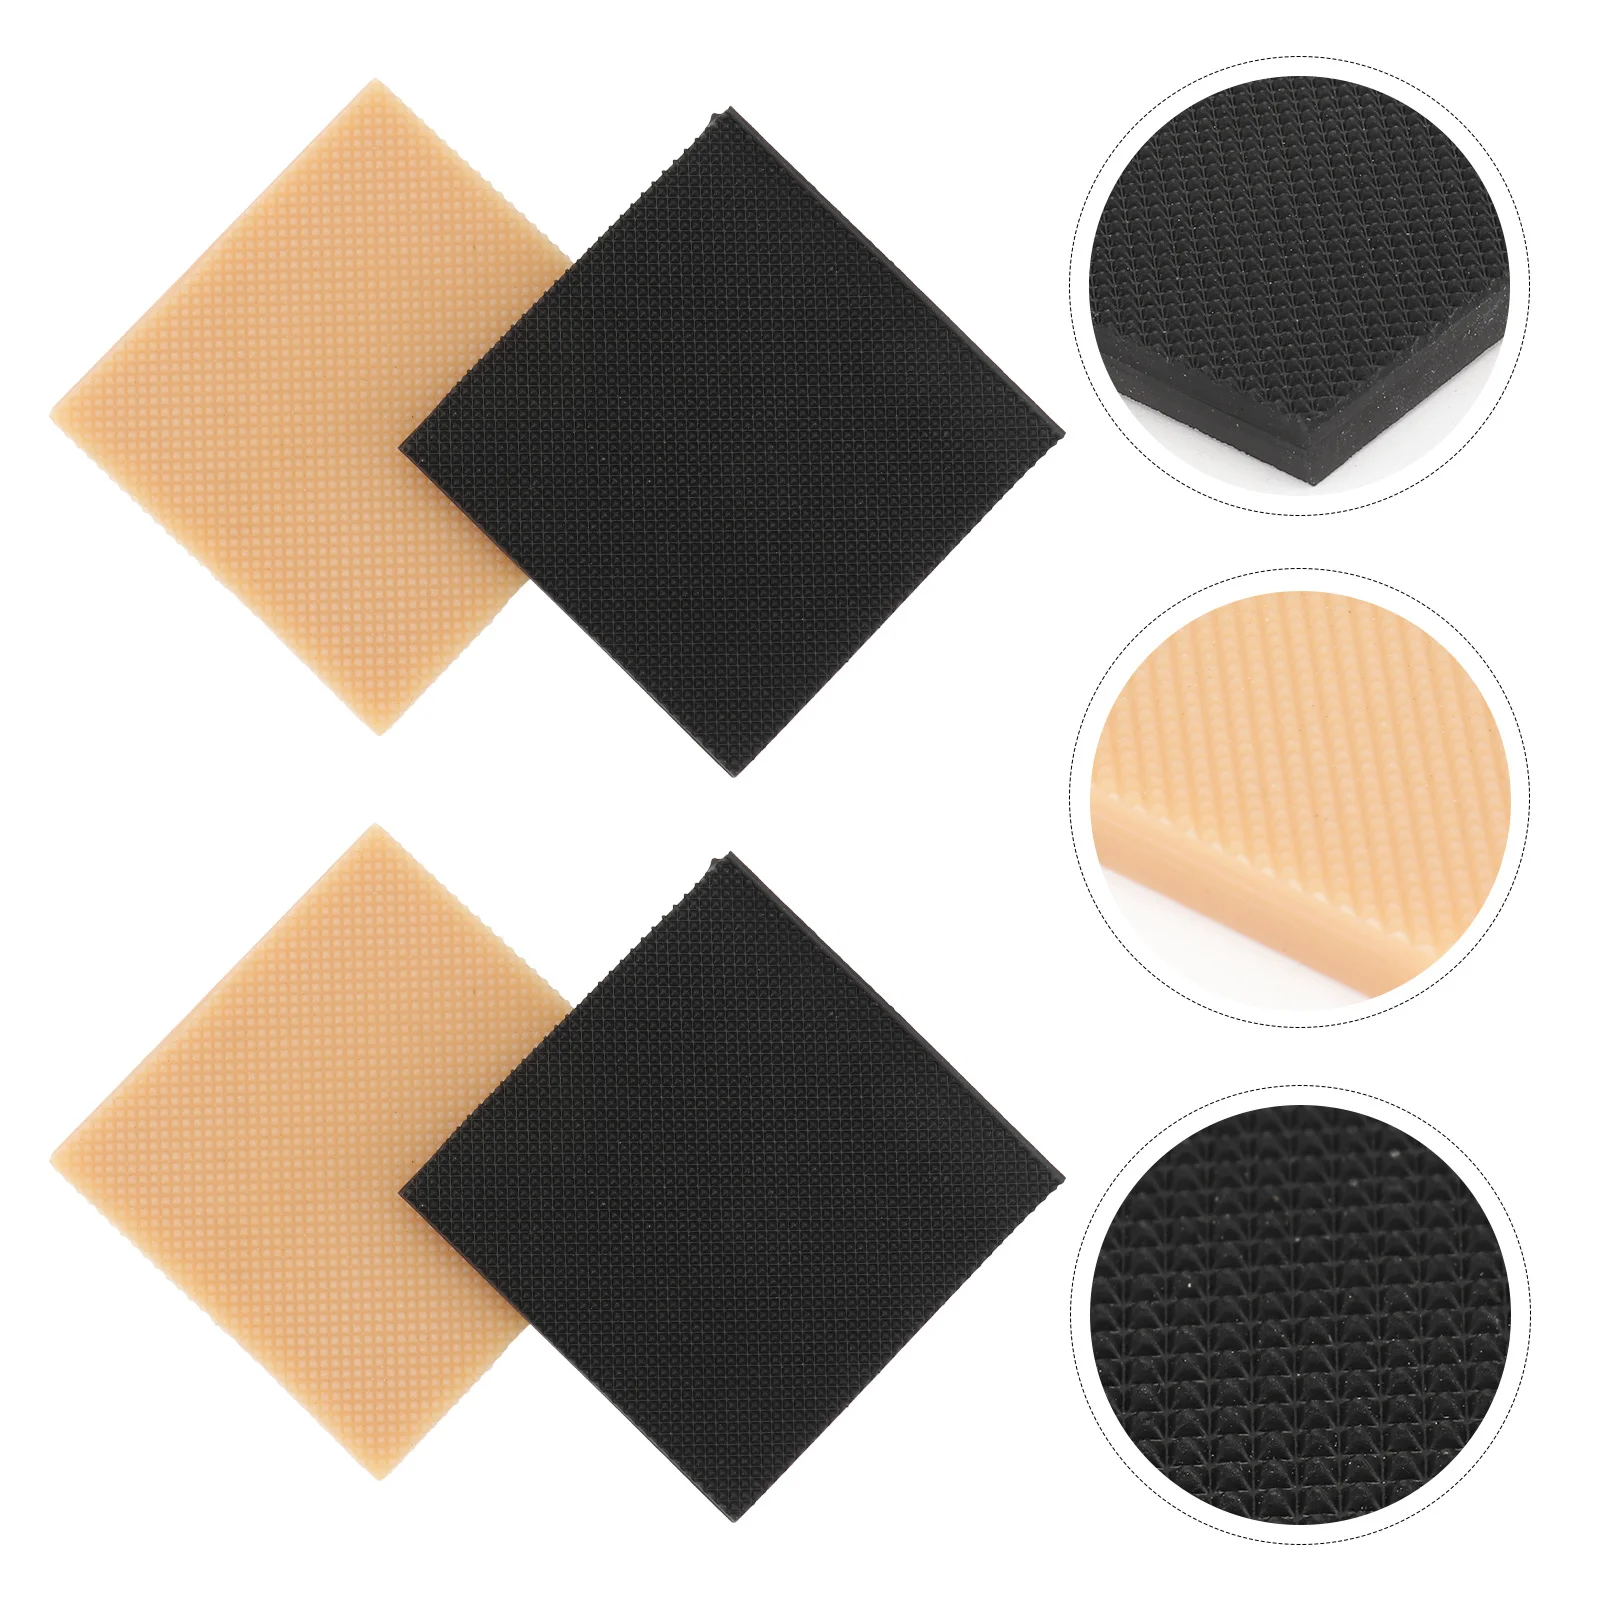 

Heelanti High Shoe Pads Sole Pad Non Tips Shoes Grips Stickers Skid Cushions Tread Replacements Repairing Women Rubber